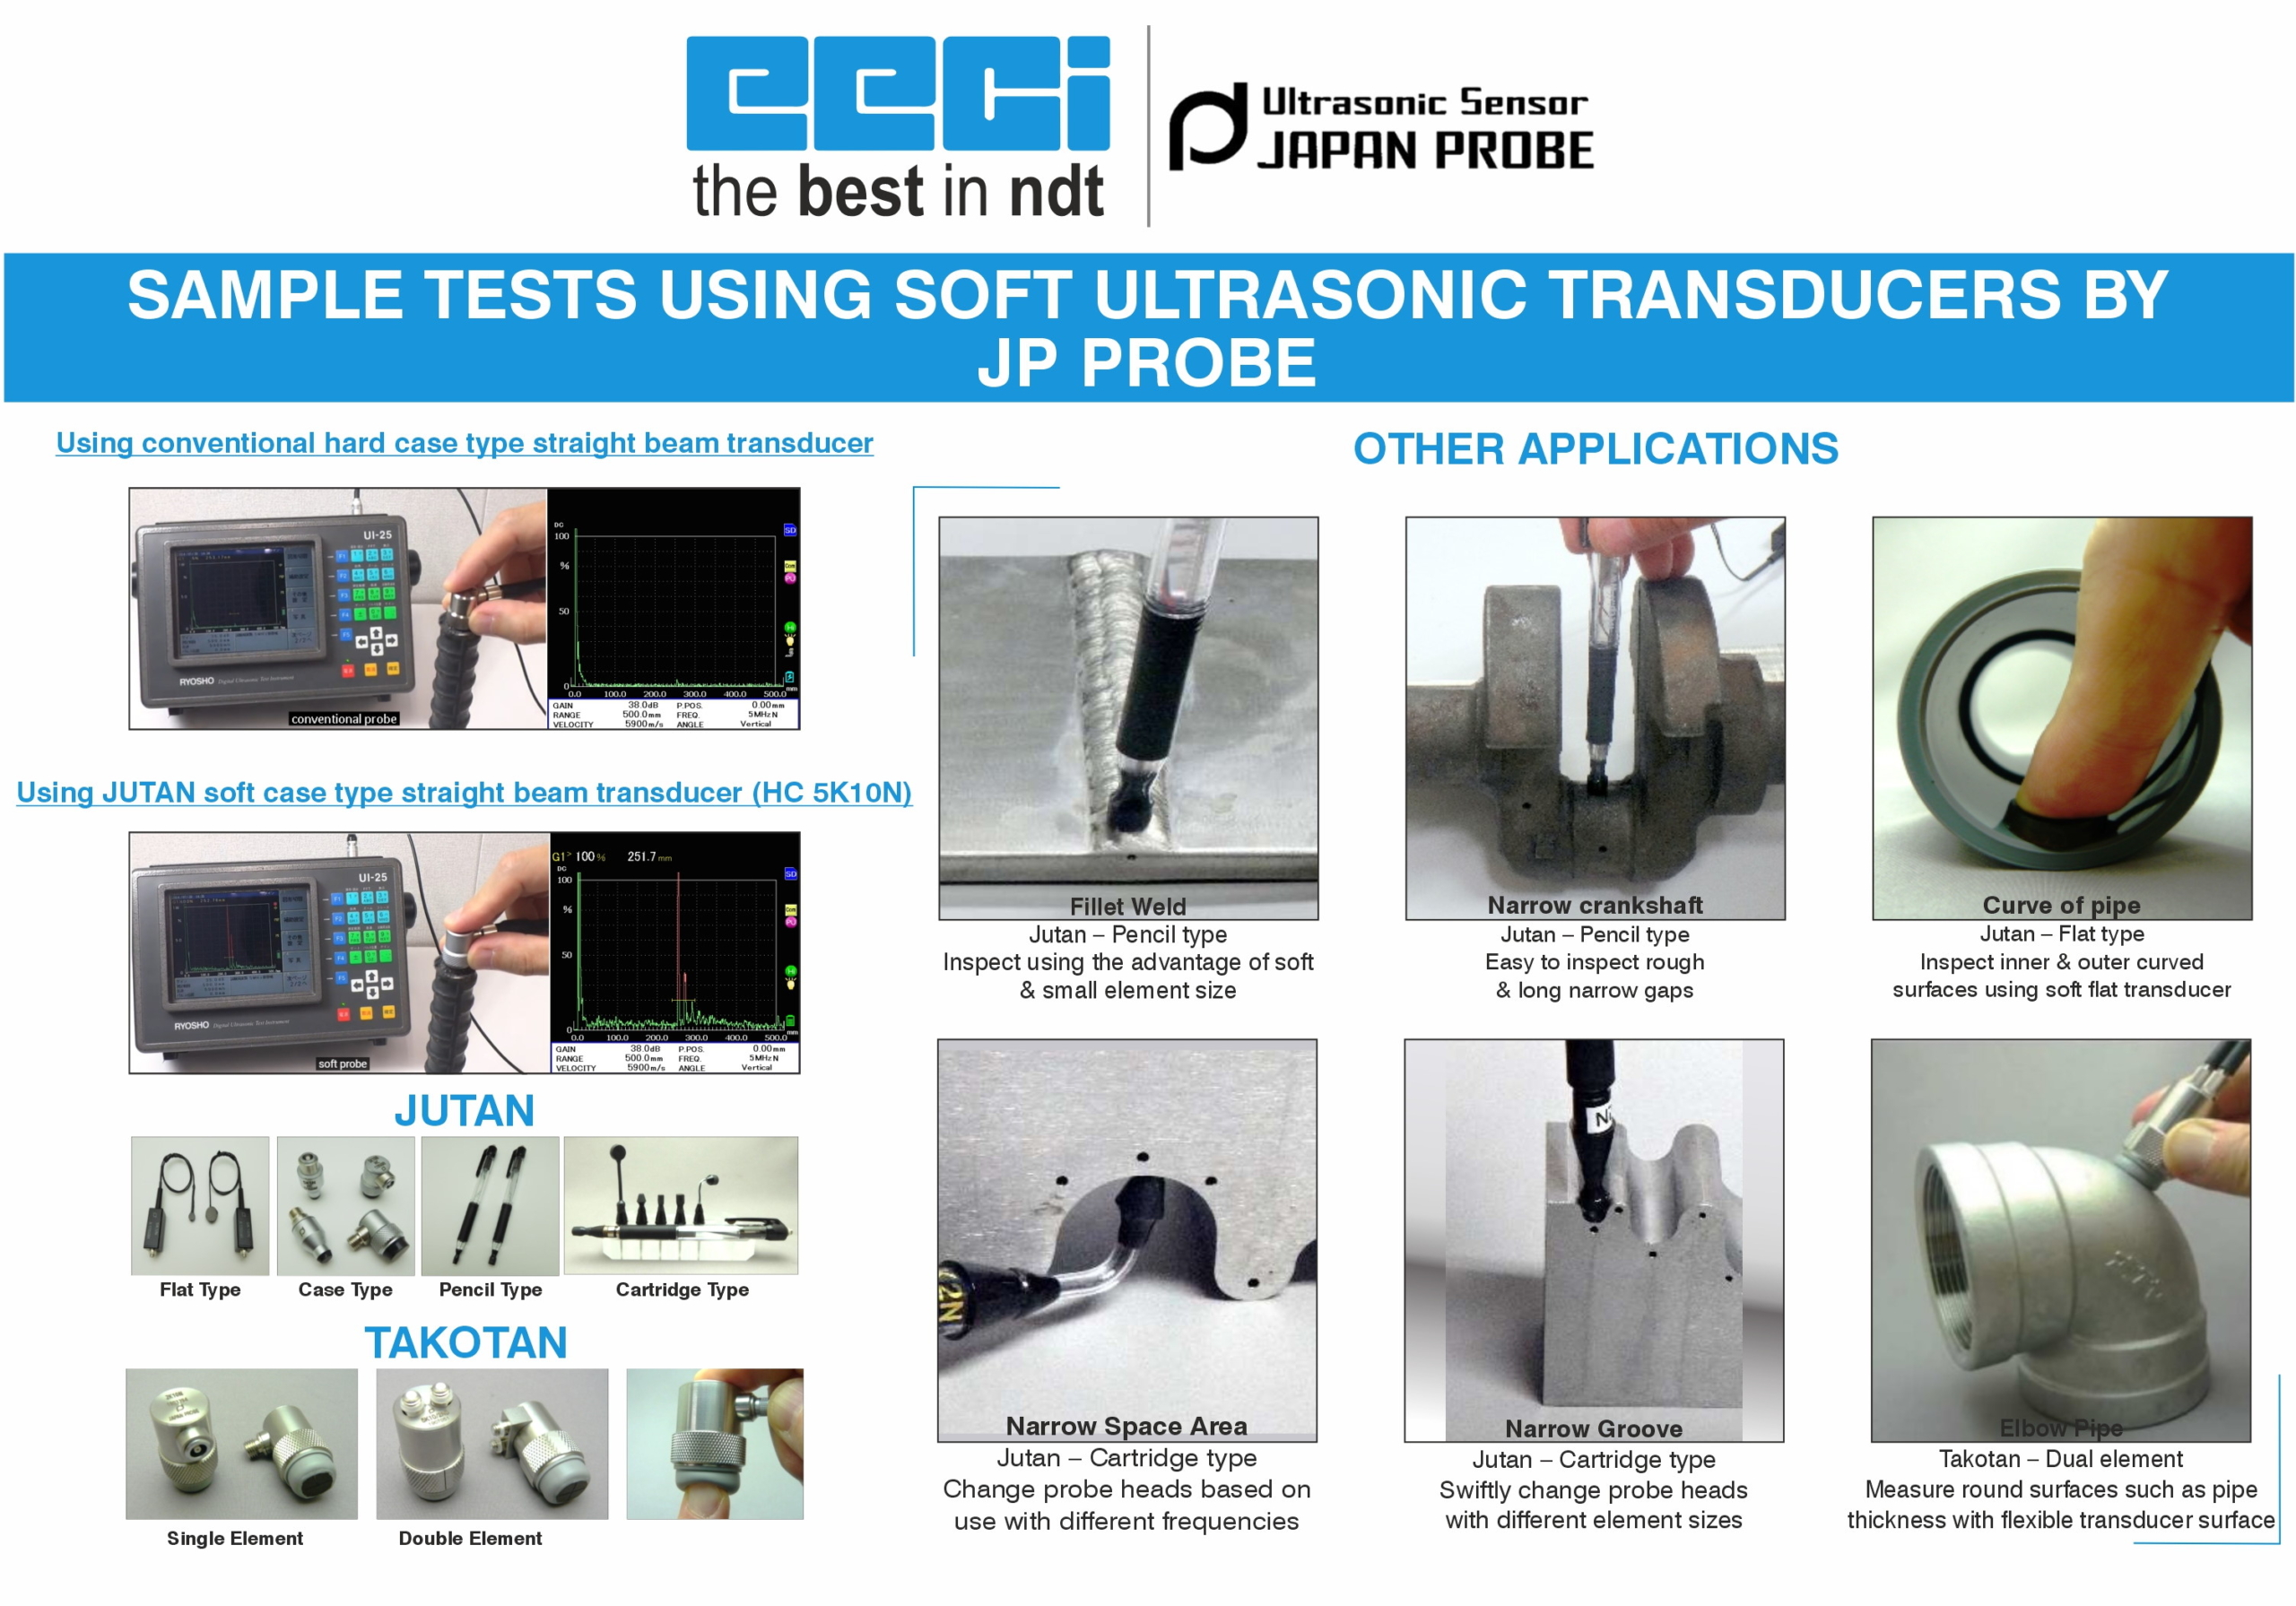 SAMPLE TESTS USING SOFT ULTRASONIC TRANSDUCERS BY JP PROBE